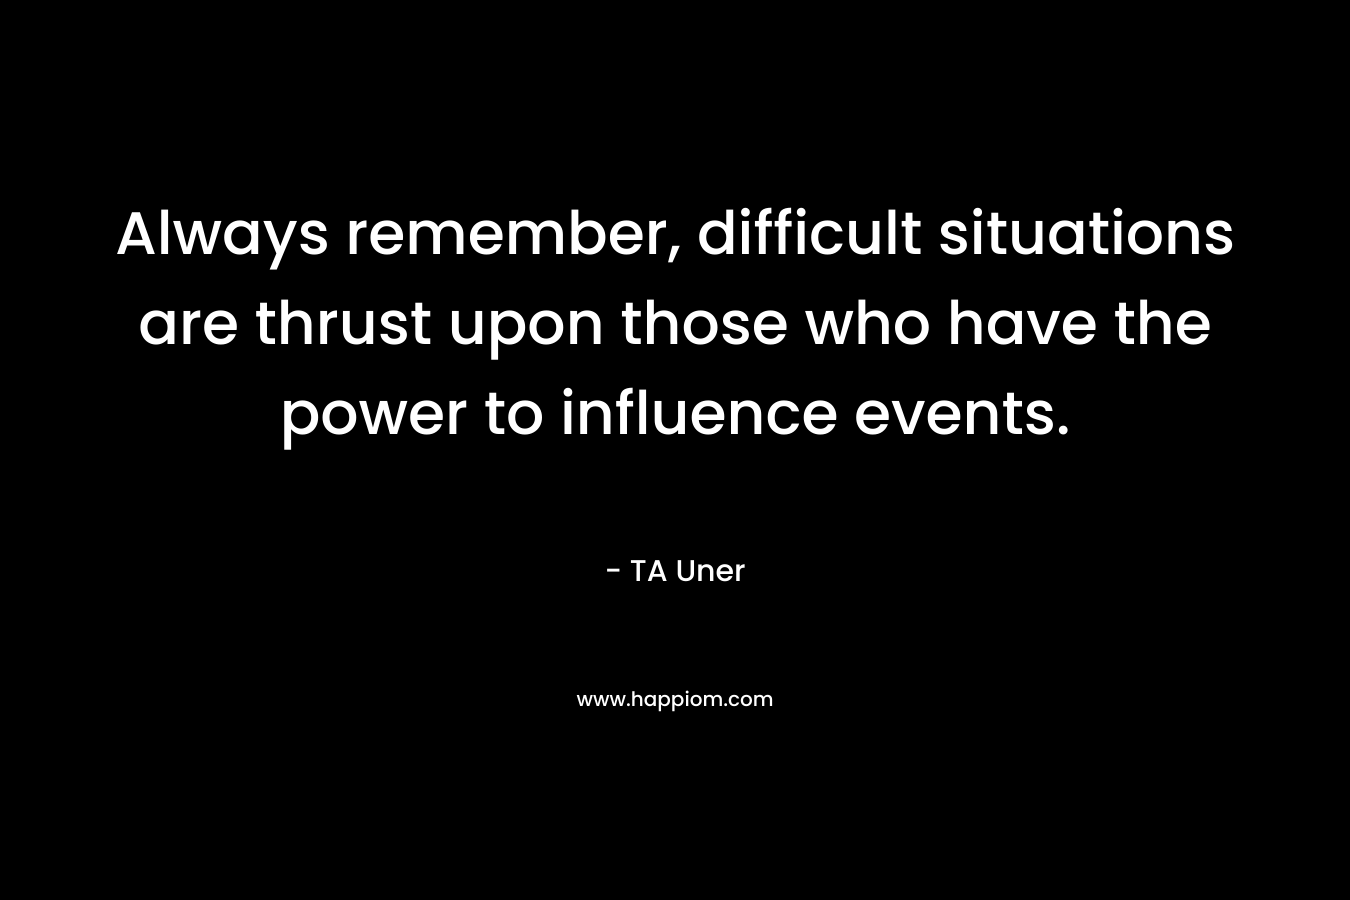 Always remember, difficult situations are thrust upon those who have the power to influence events.